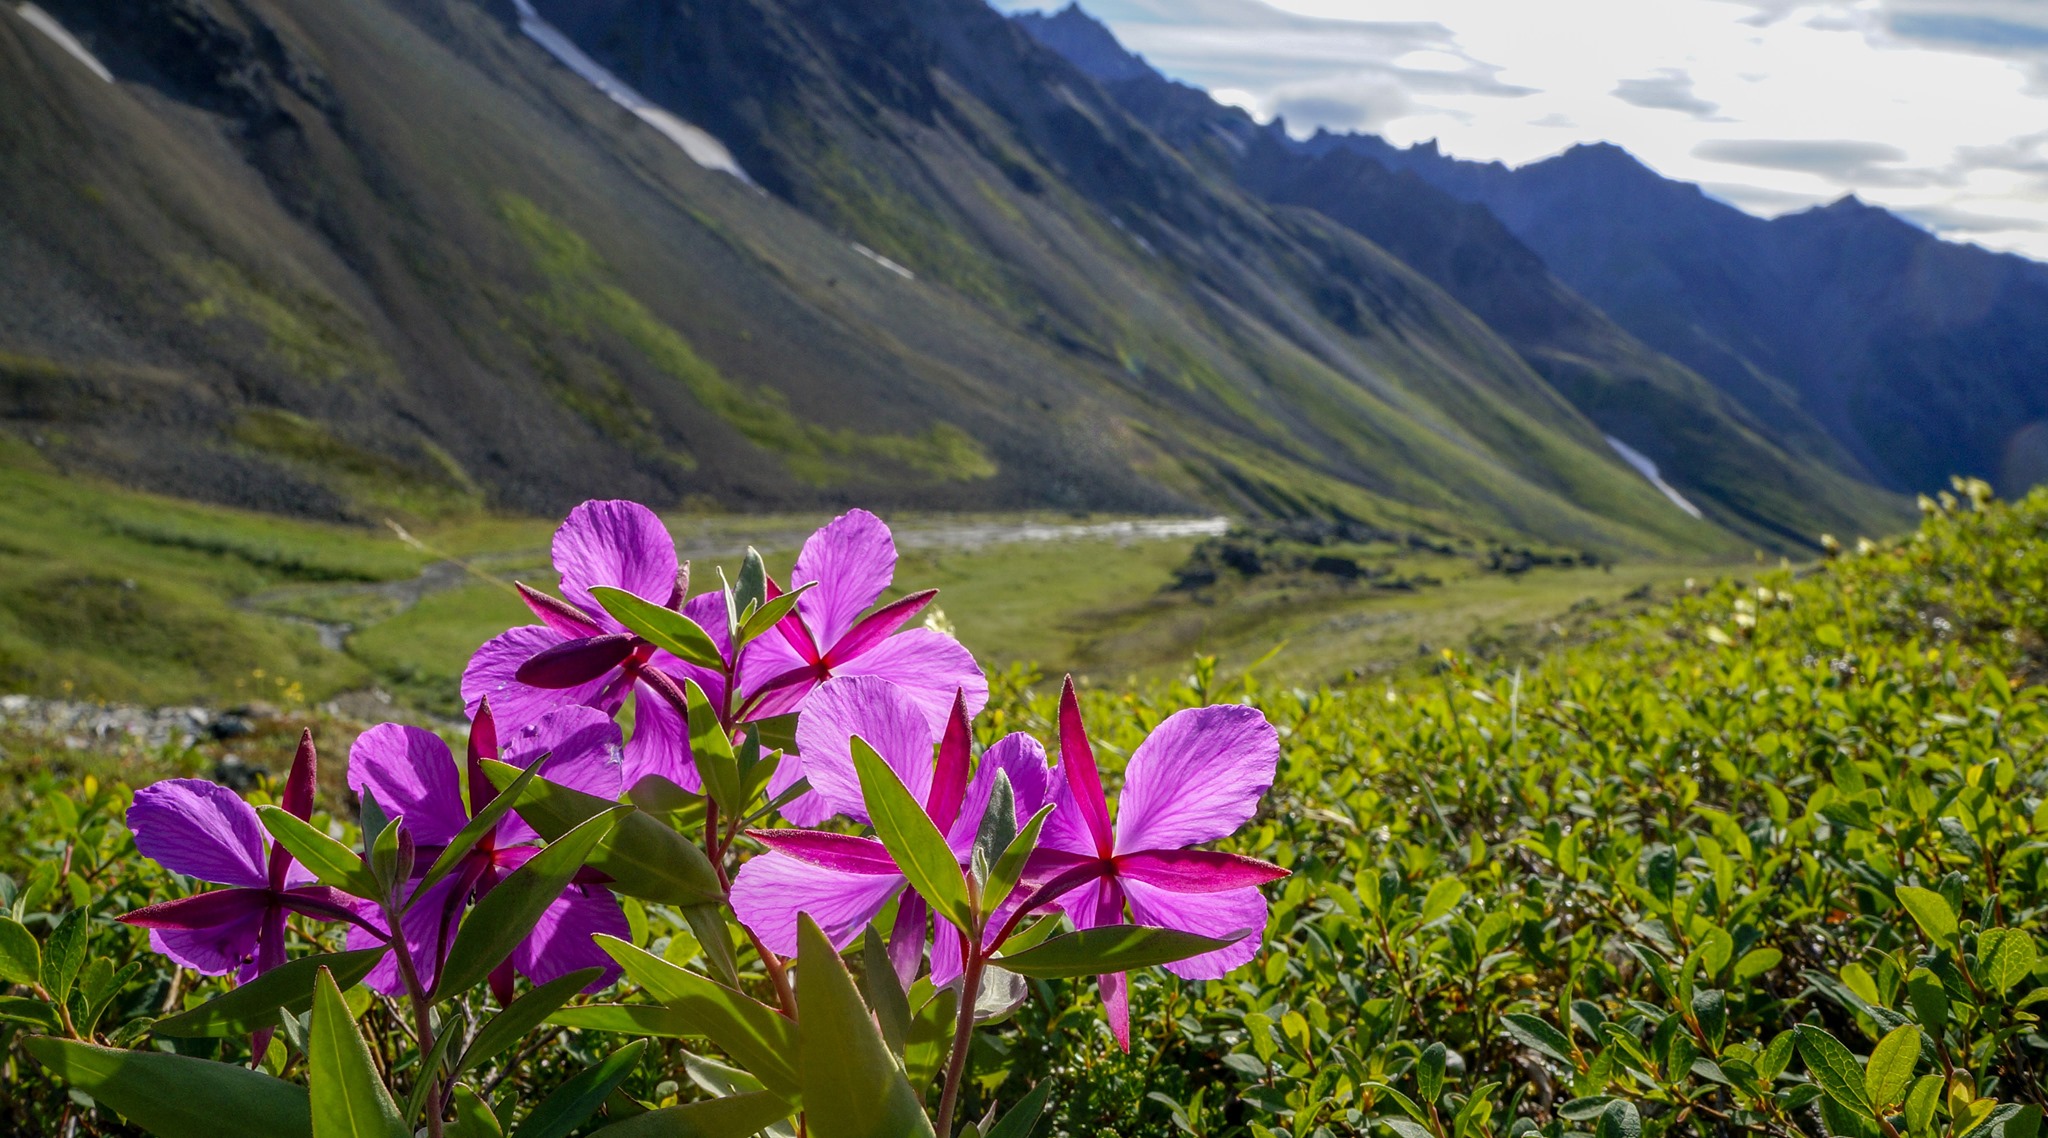 Pink flowers in a green field in front of mountains